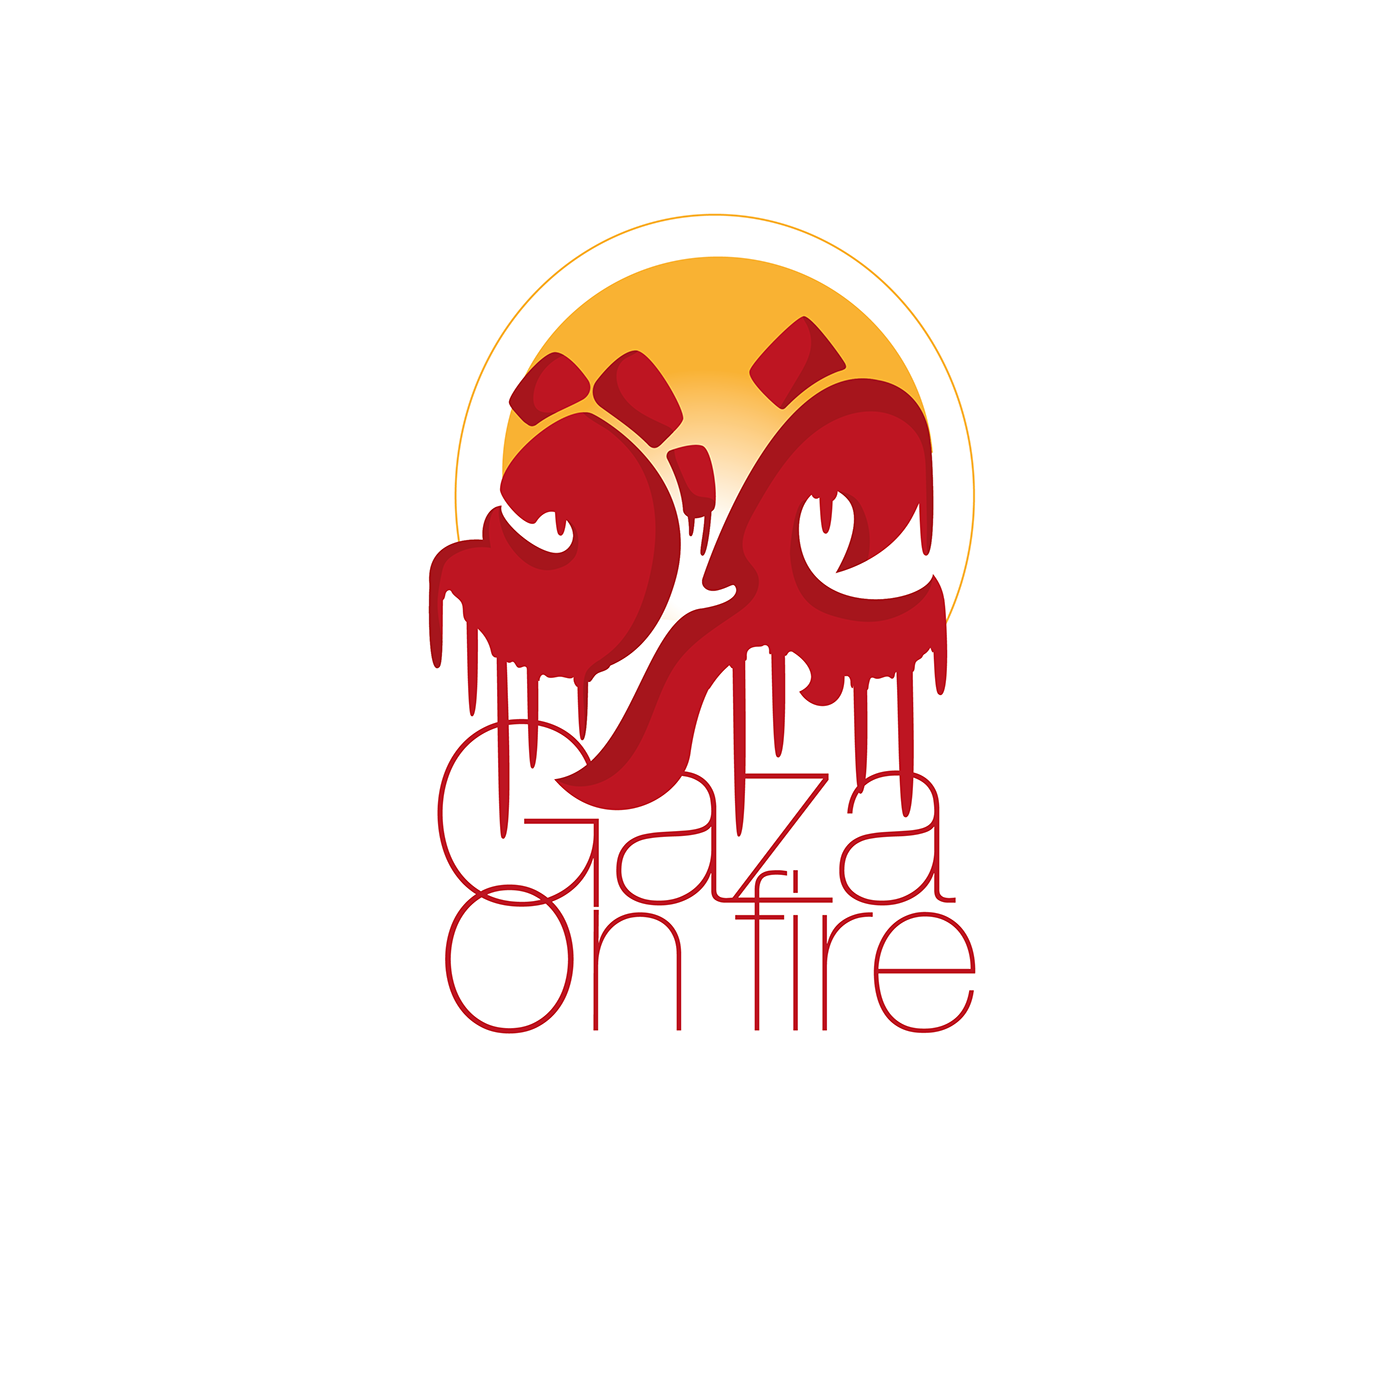 blood Calligraphy   Drawing  gazaunderattack lettering logos Logotype save typography   غزة